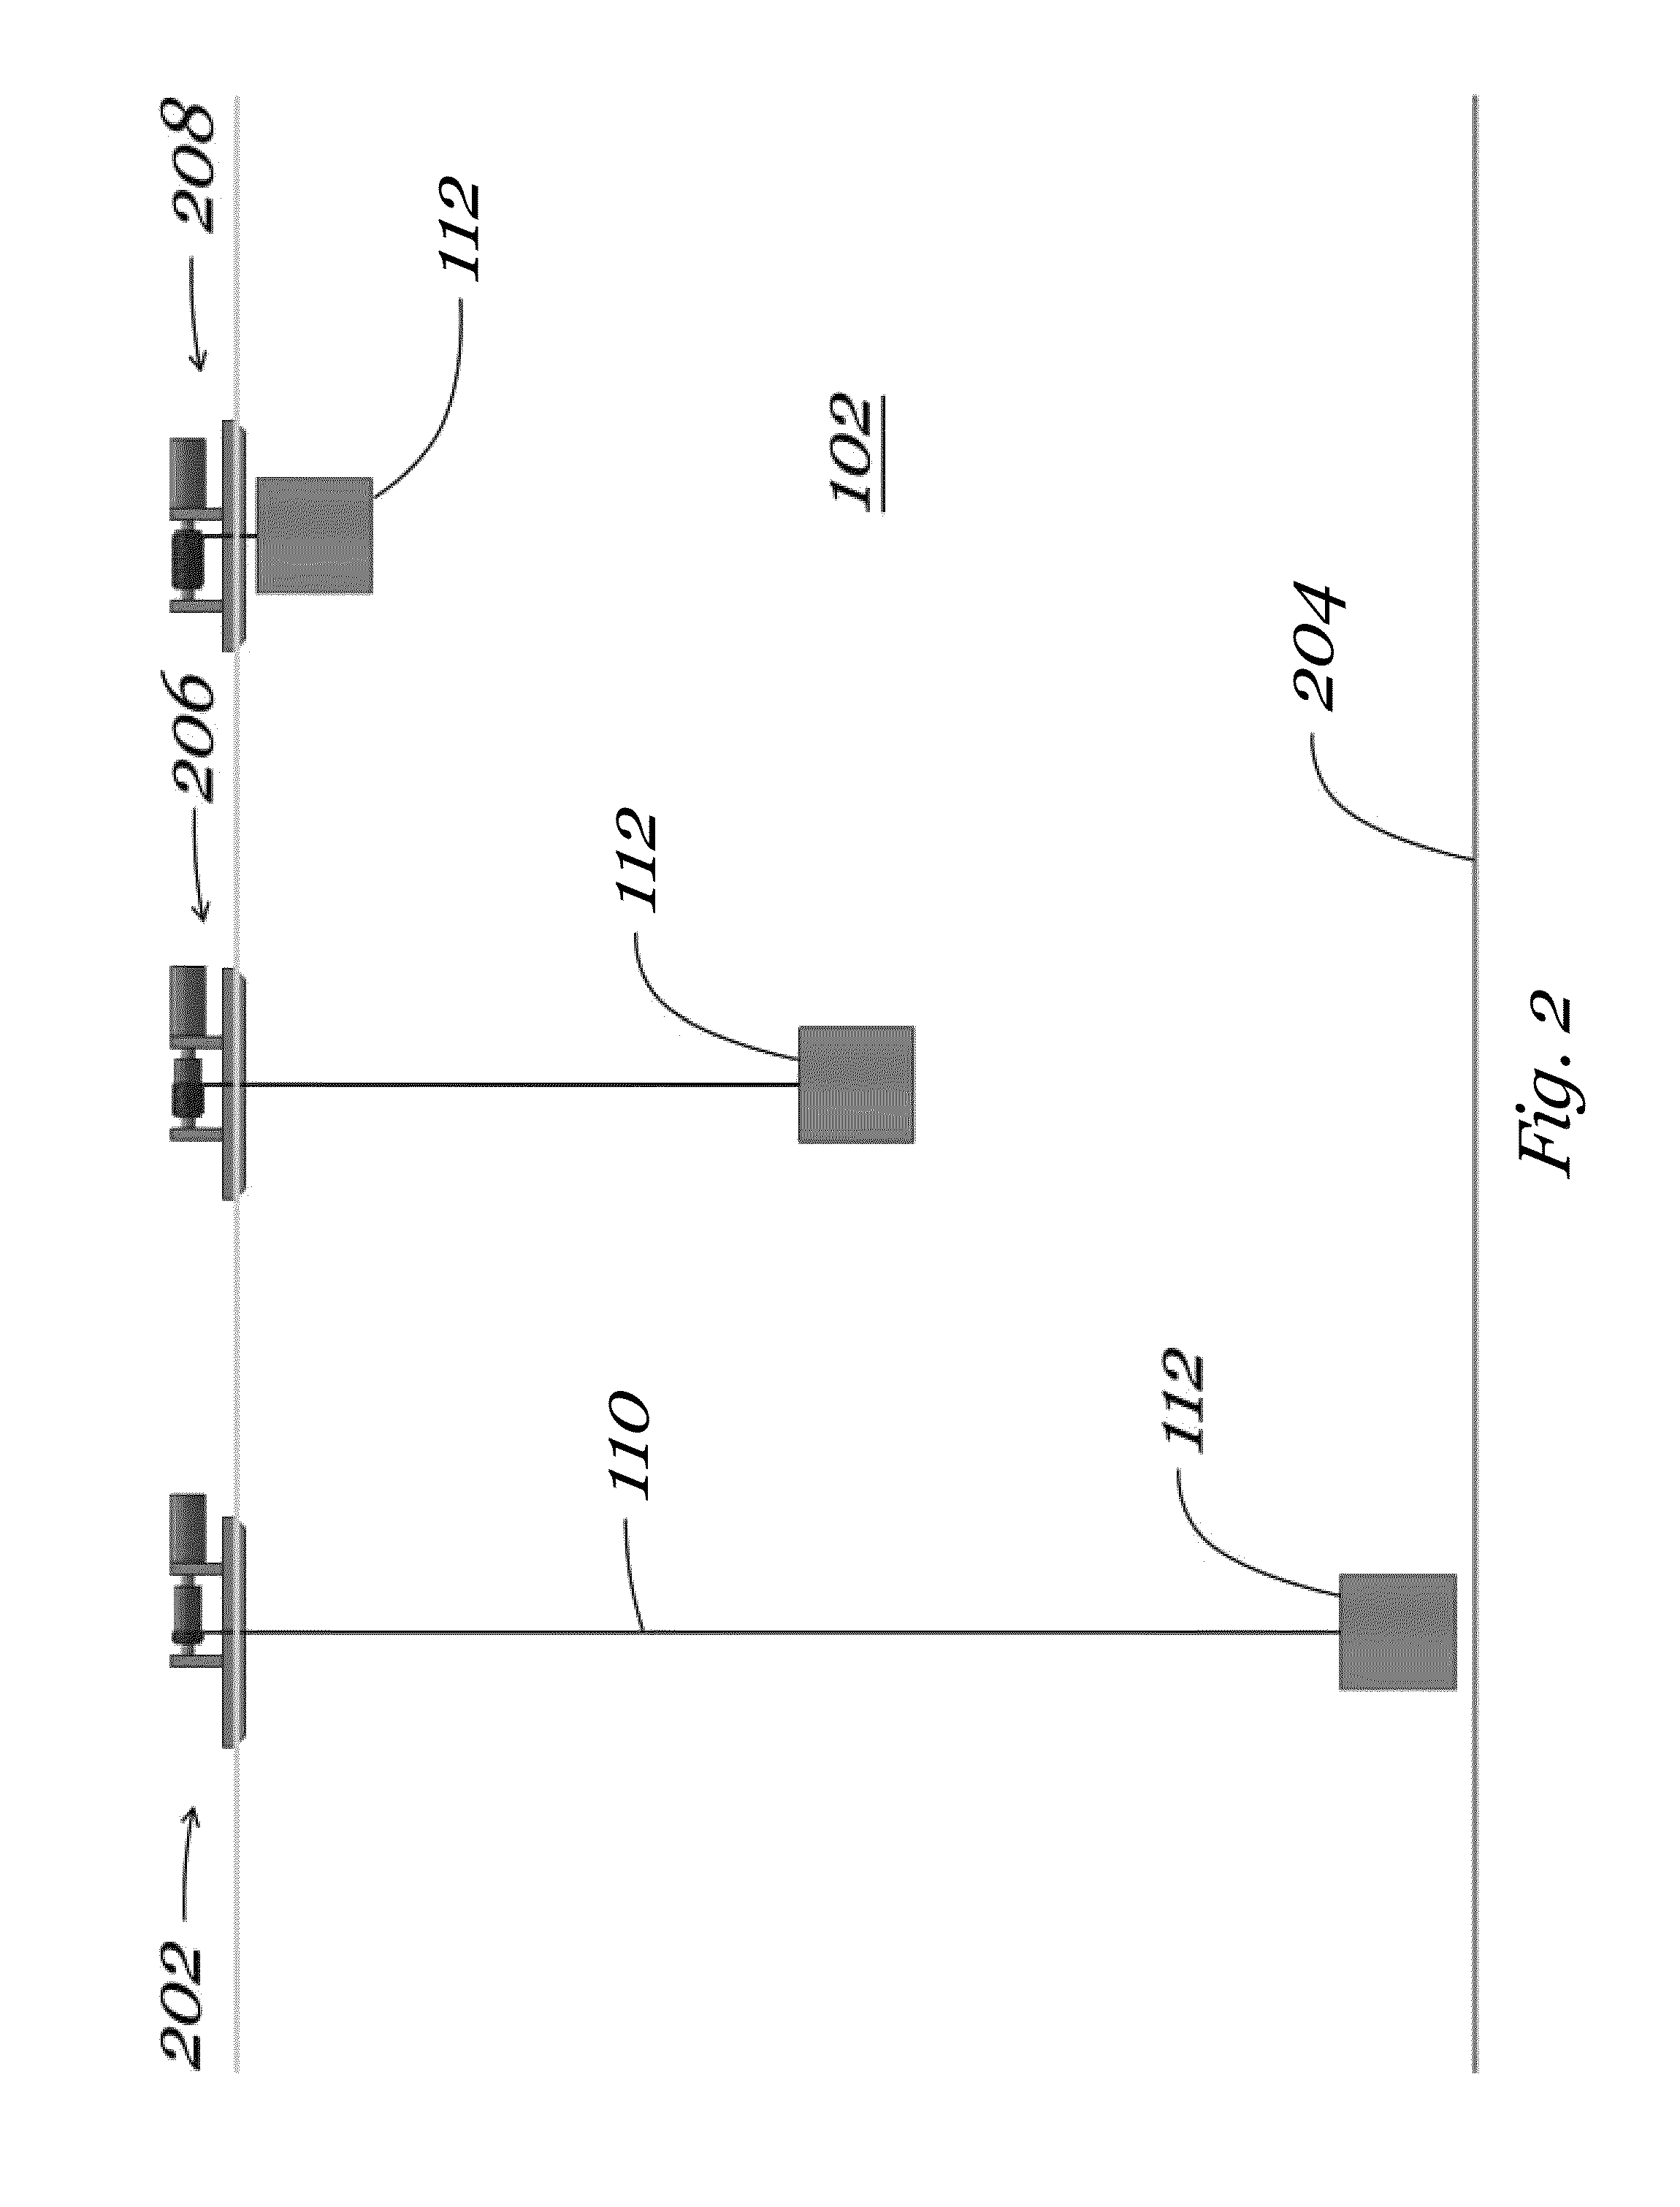 Energy storage devices and methods of using same